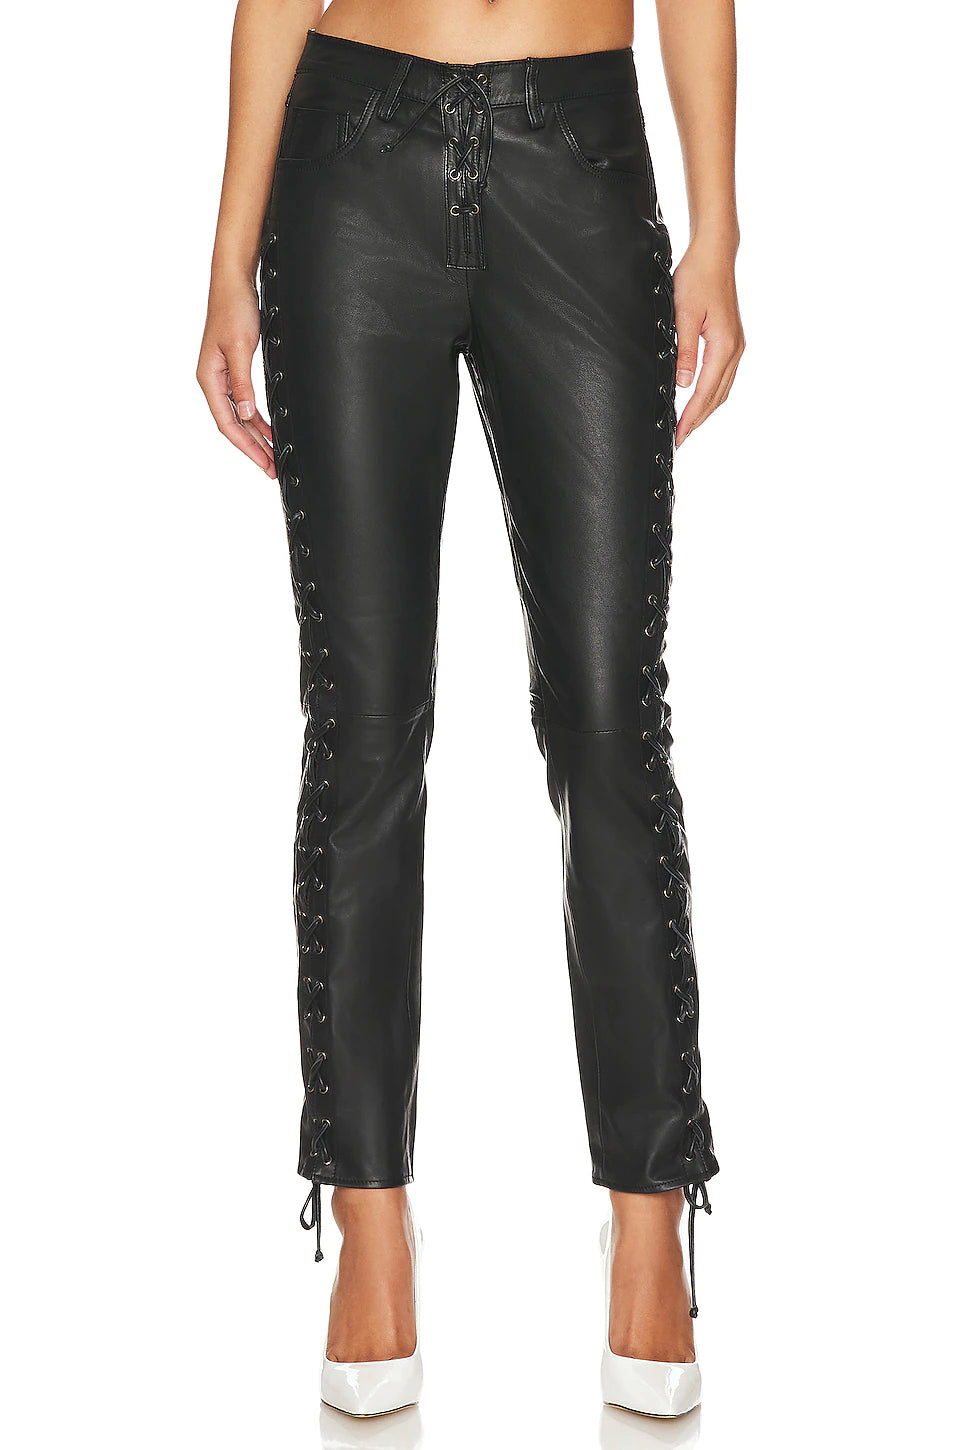 One Teaspoon Blacklight Leather Lace-up Pants in Black - FINAL SALE